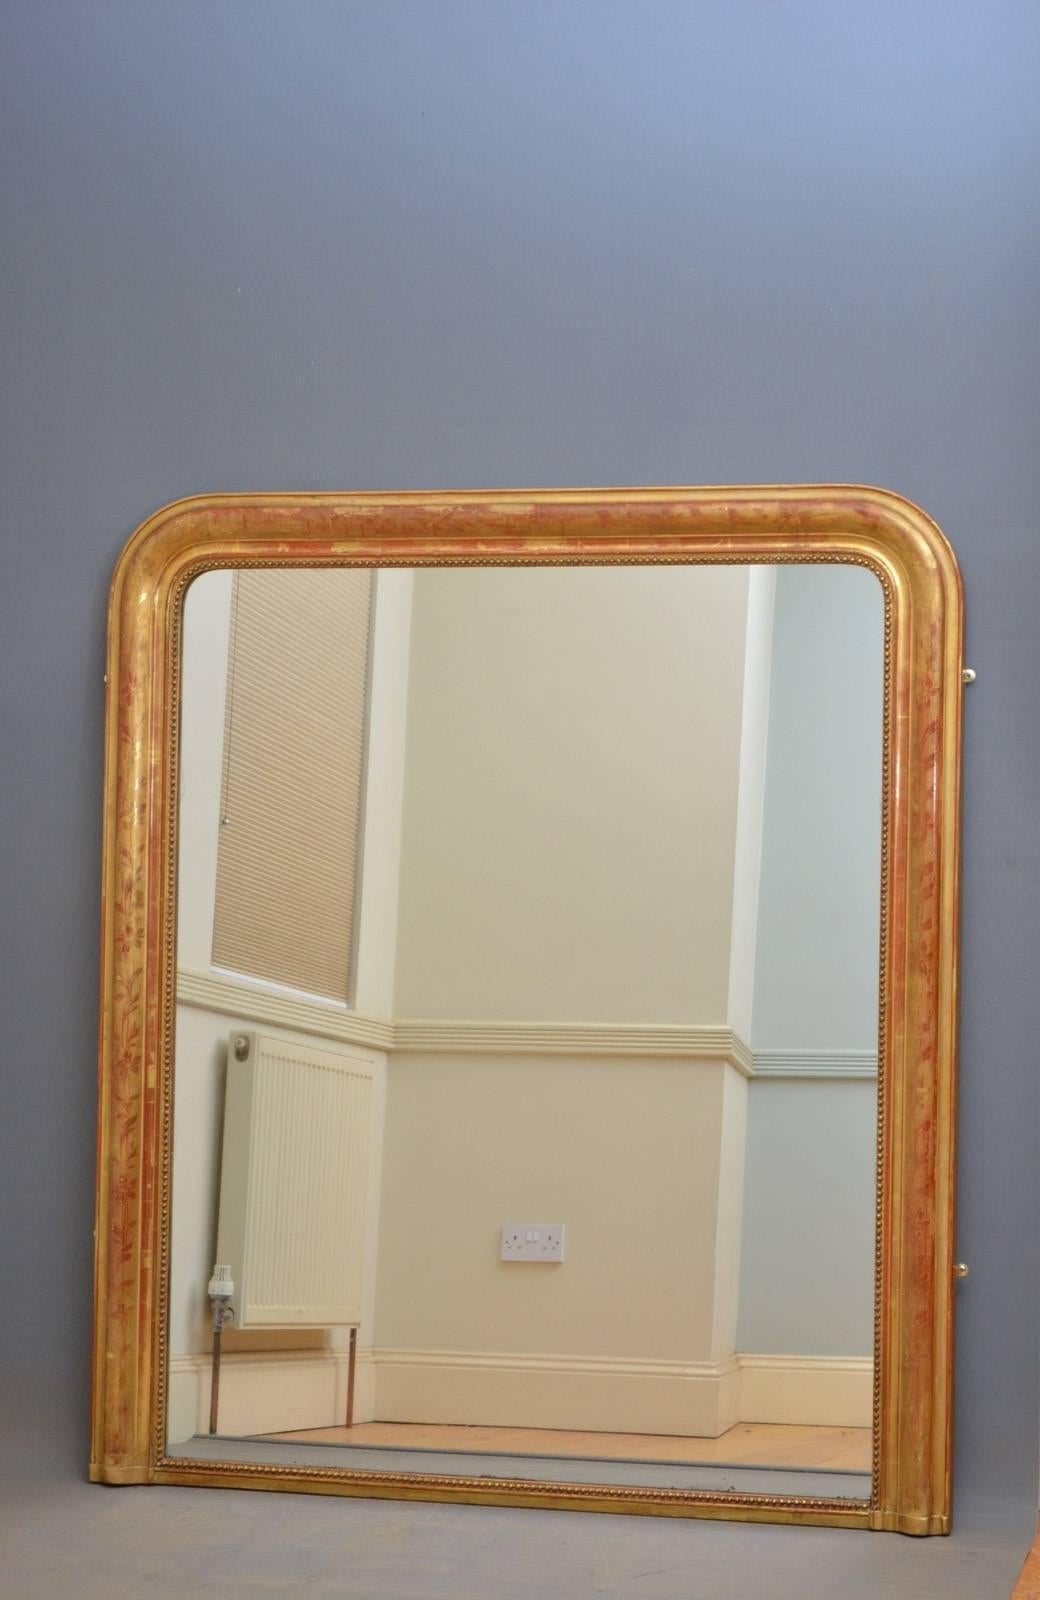 Sn4268 French giltwood overmantel mirror, having original mirror plate with some foxing in moulded frame decorated with flowers and leaves. This antique gilded mirror is in fantastic original condition throughout, ready to place at home, circa